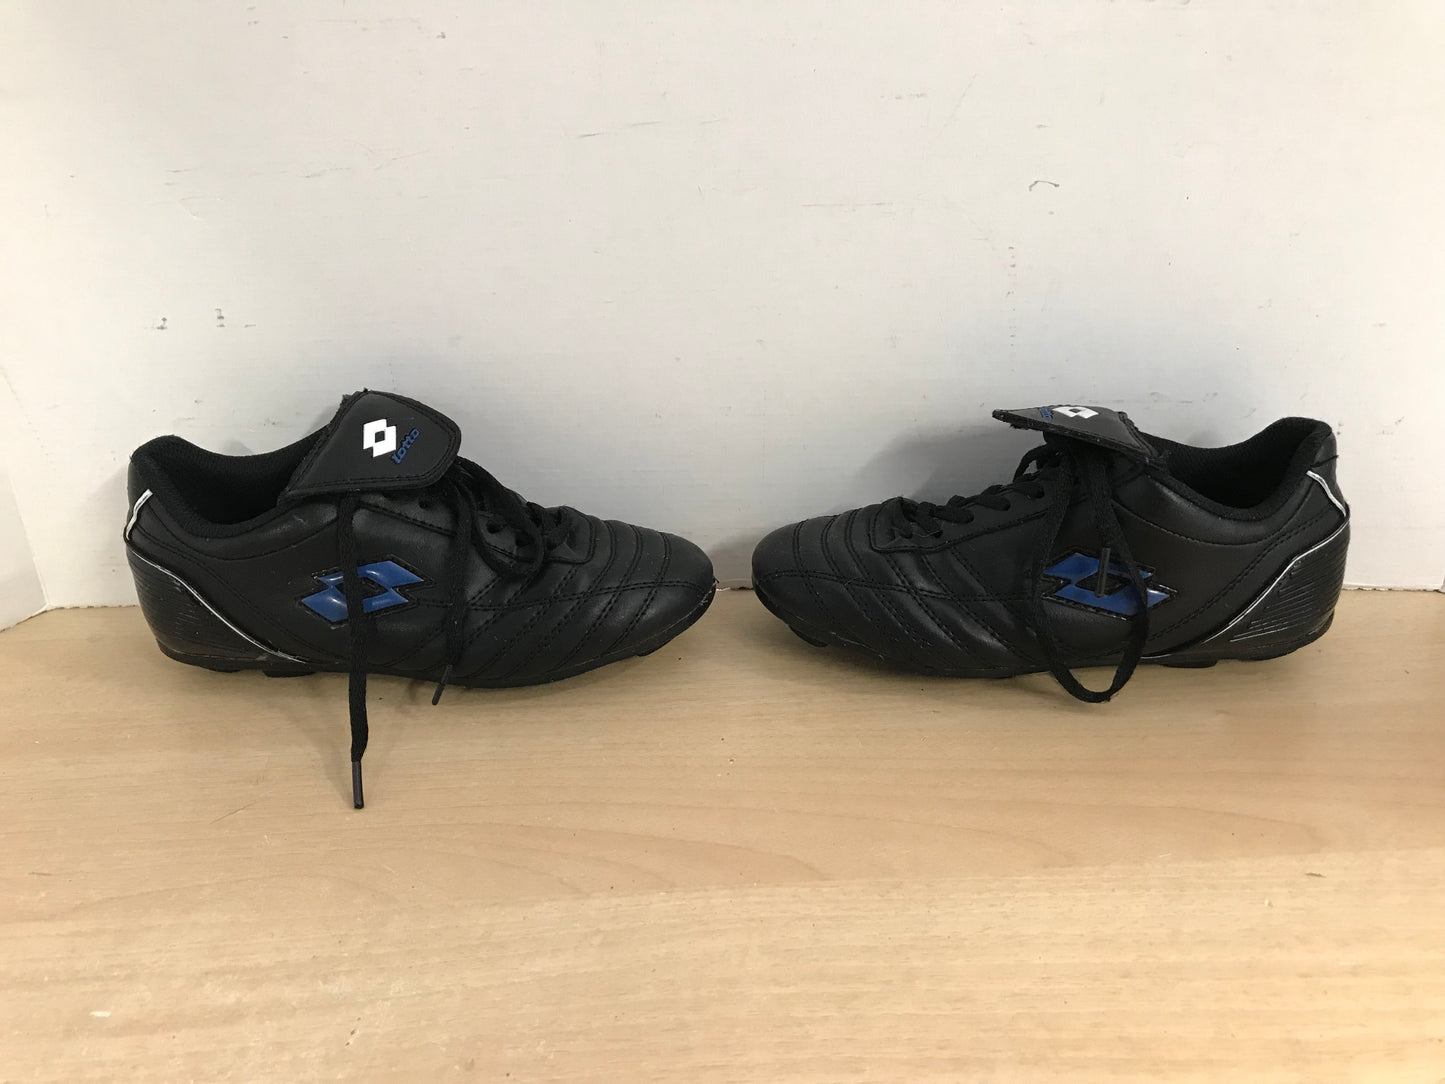 Soccer Shoes Cleats Child Size 2 Lotto Blue Black